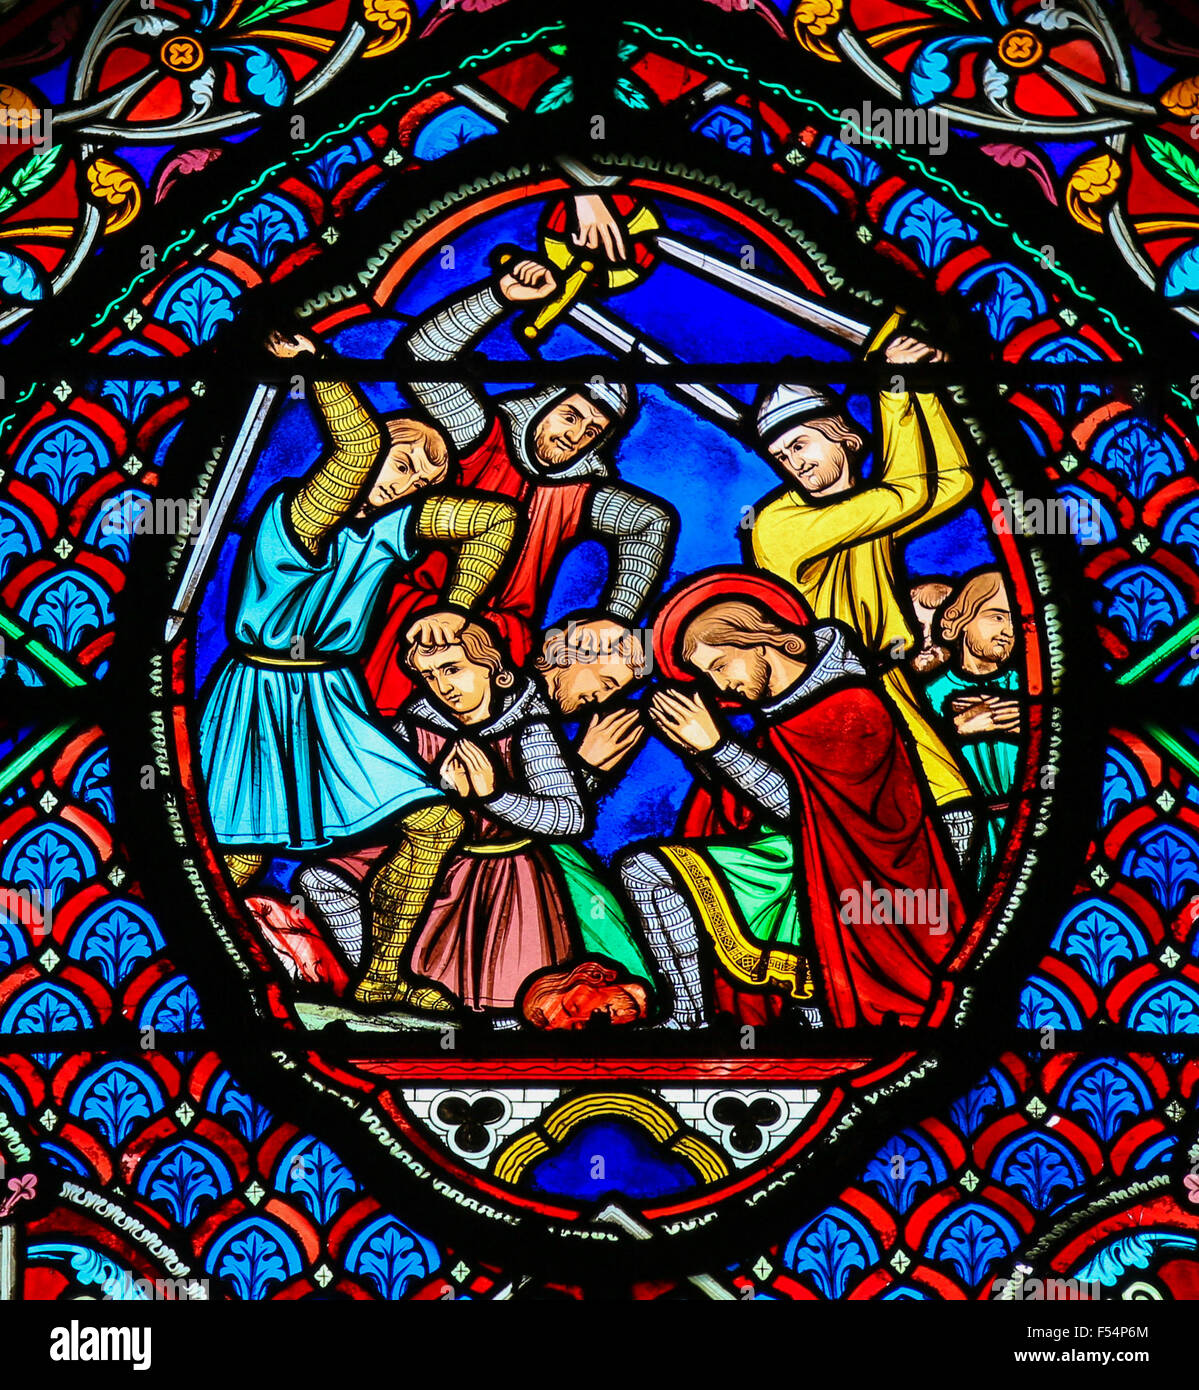 Stained glass window depicting Martyrs in the Saint Gatien Cathedral of Tours, France. Stock Photo